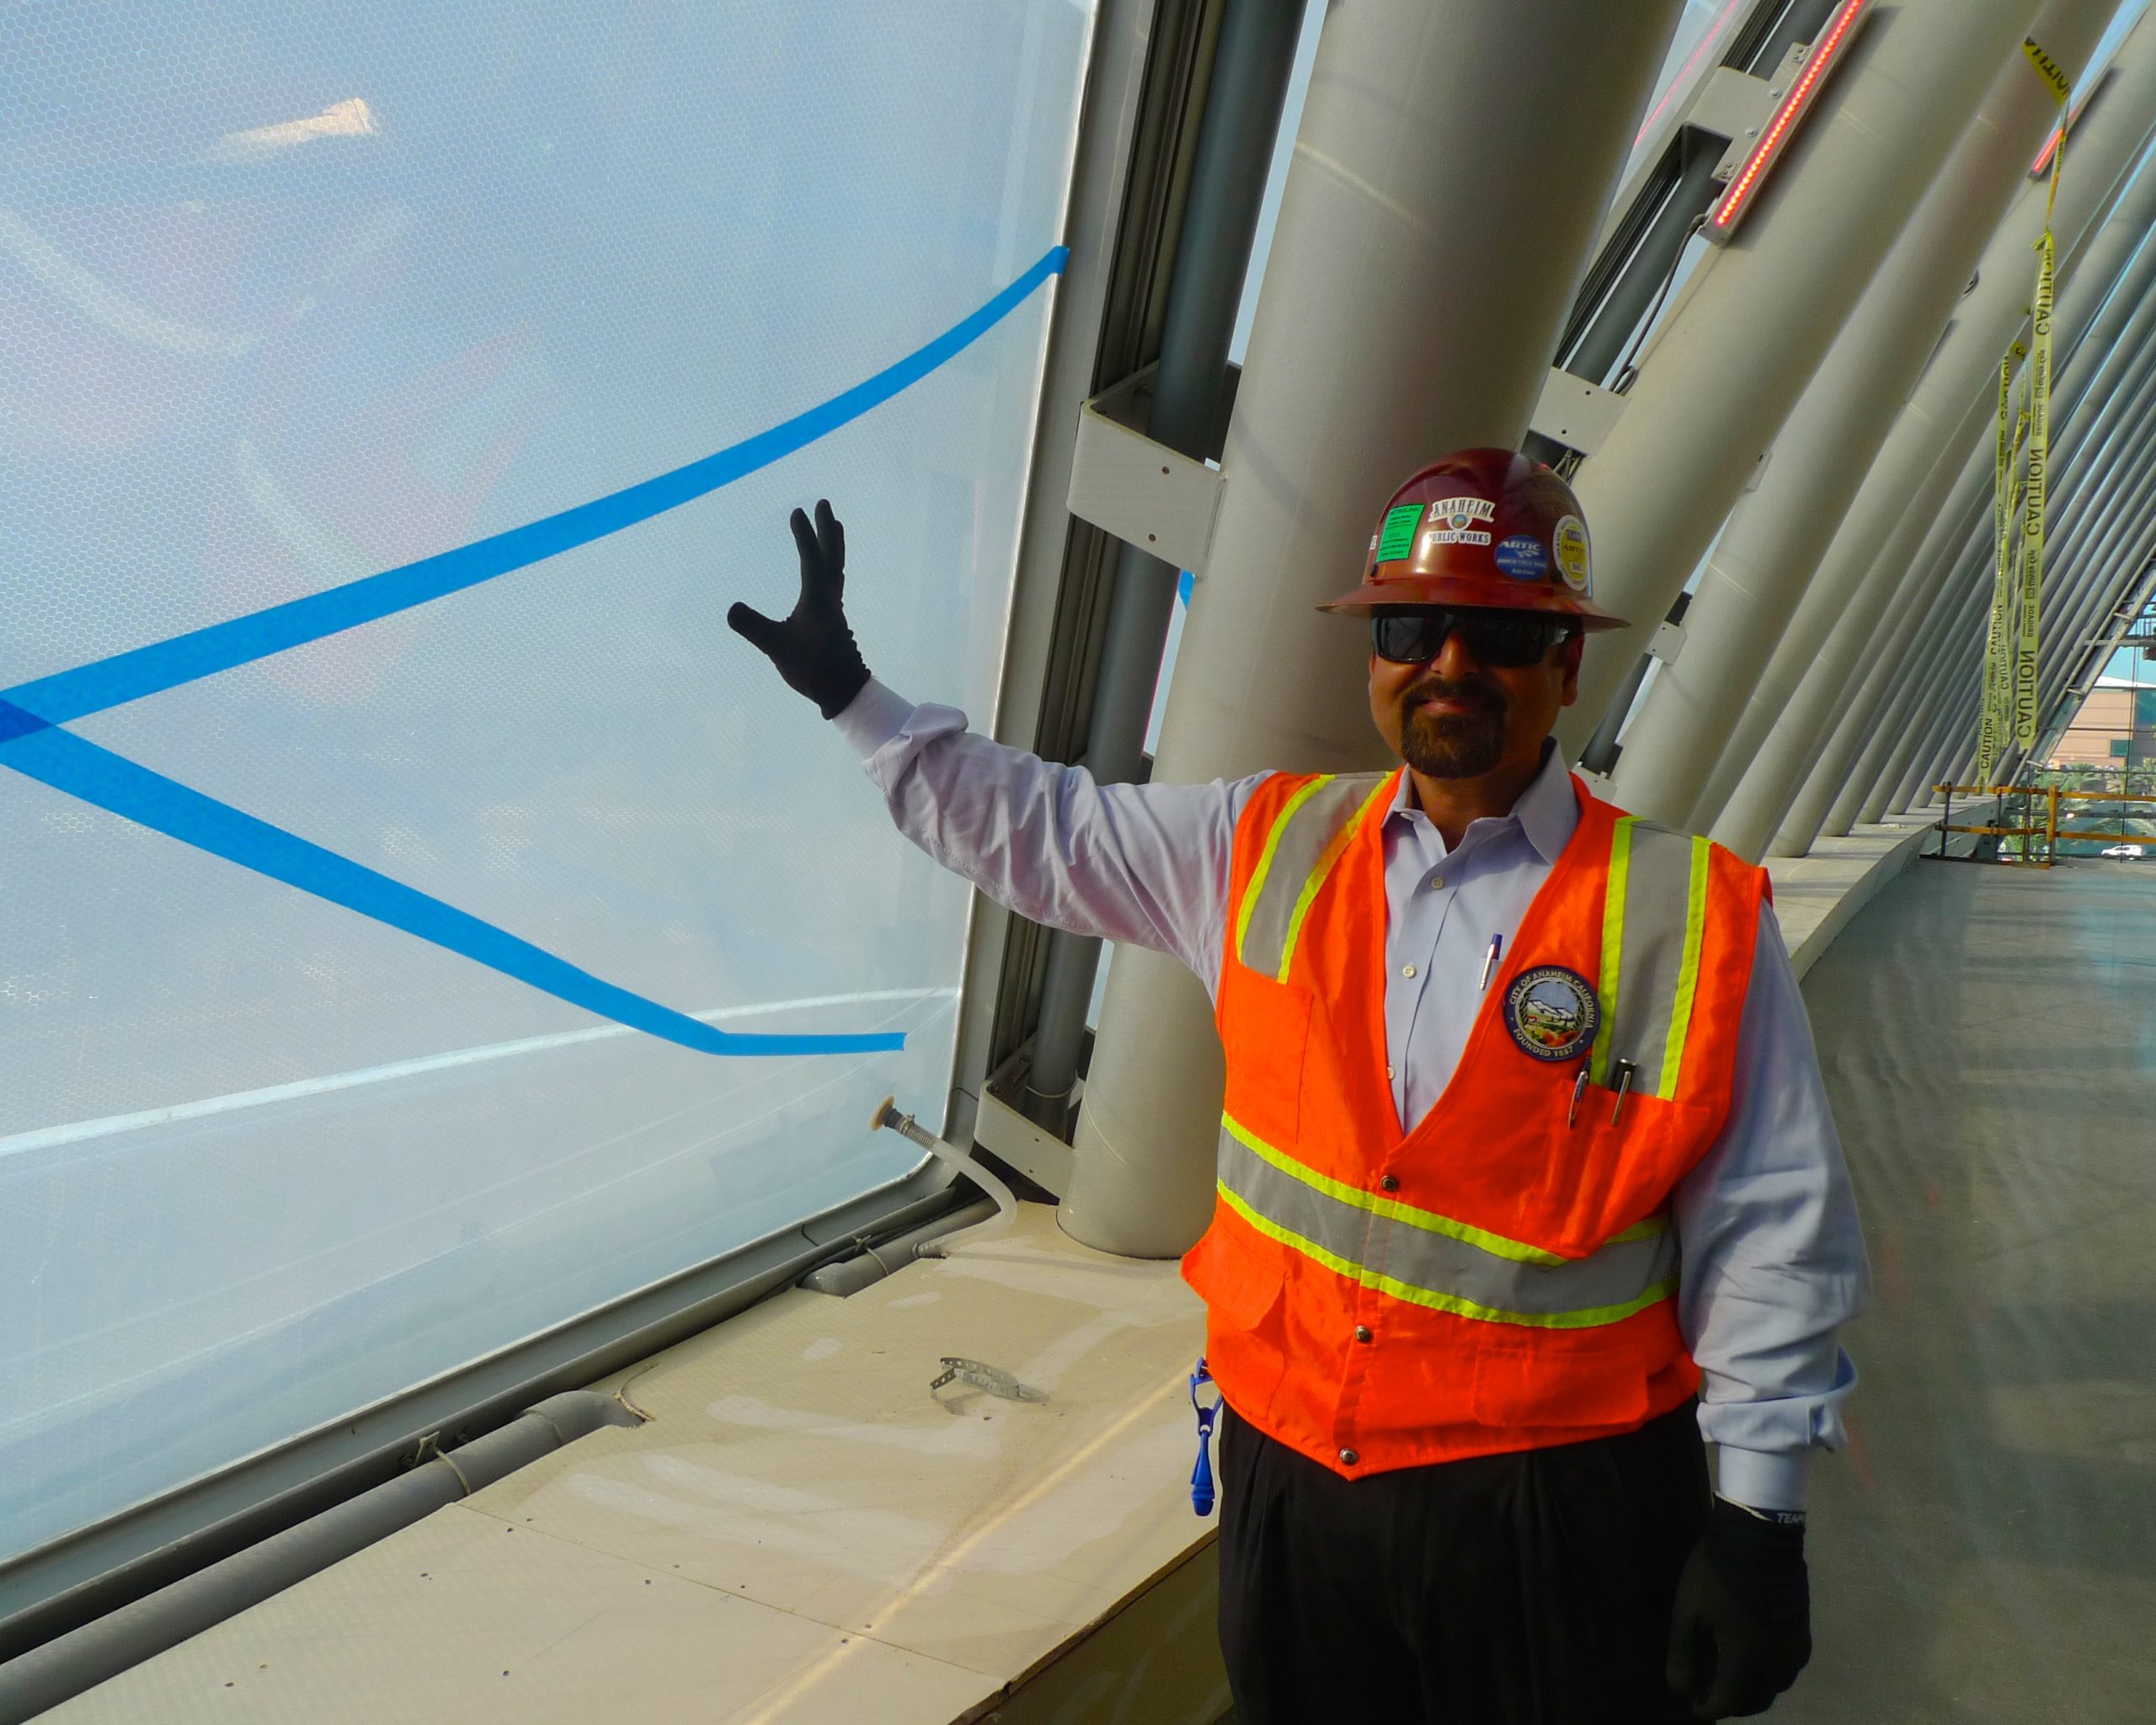 A Tour Of The Futuristic Roof On California’s High-Speed Rail Station